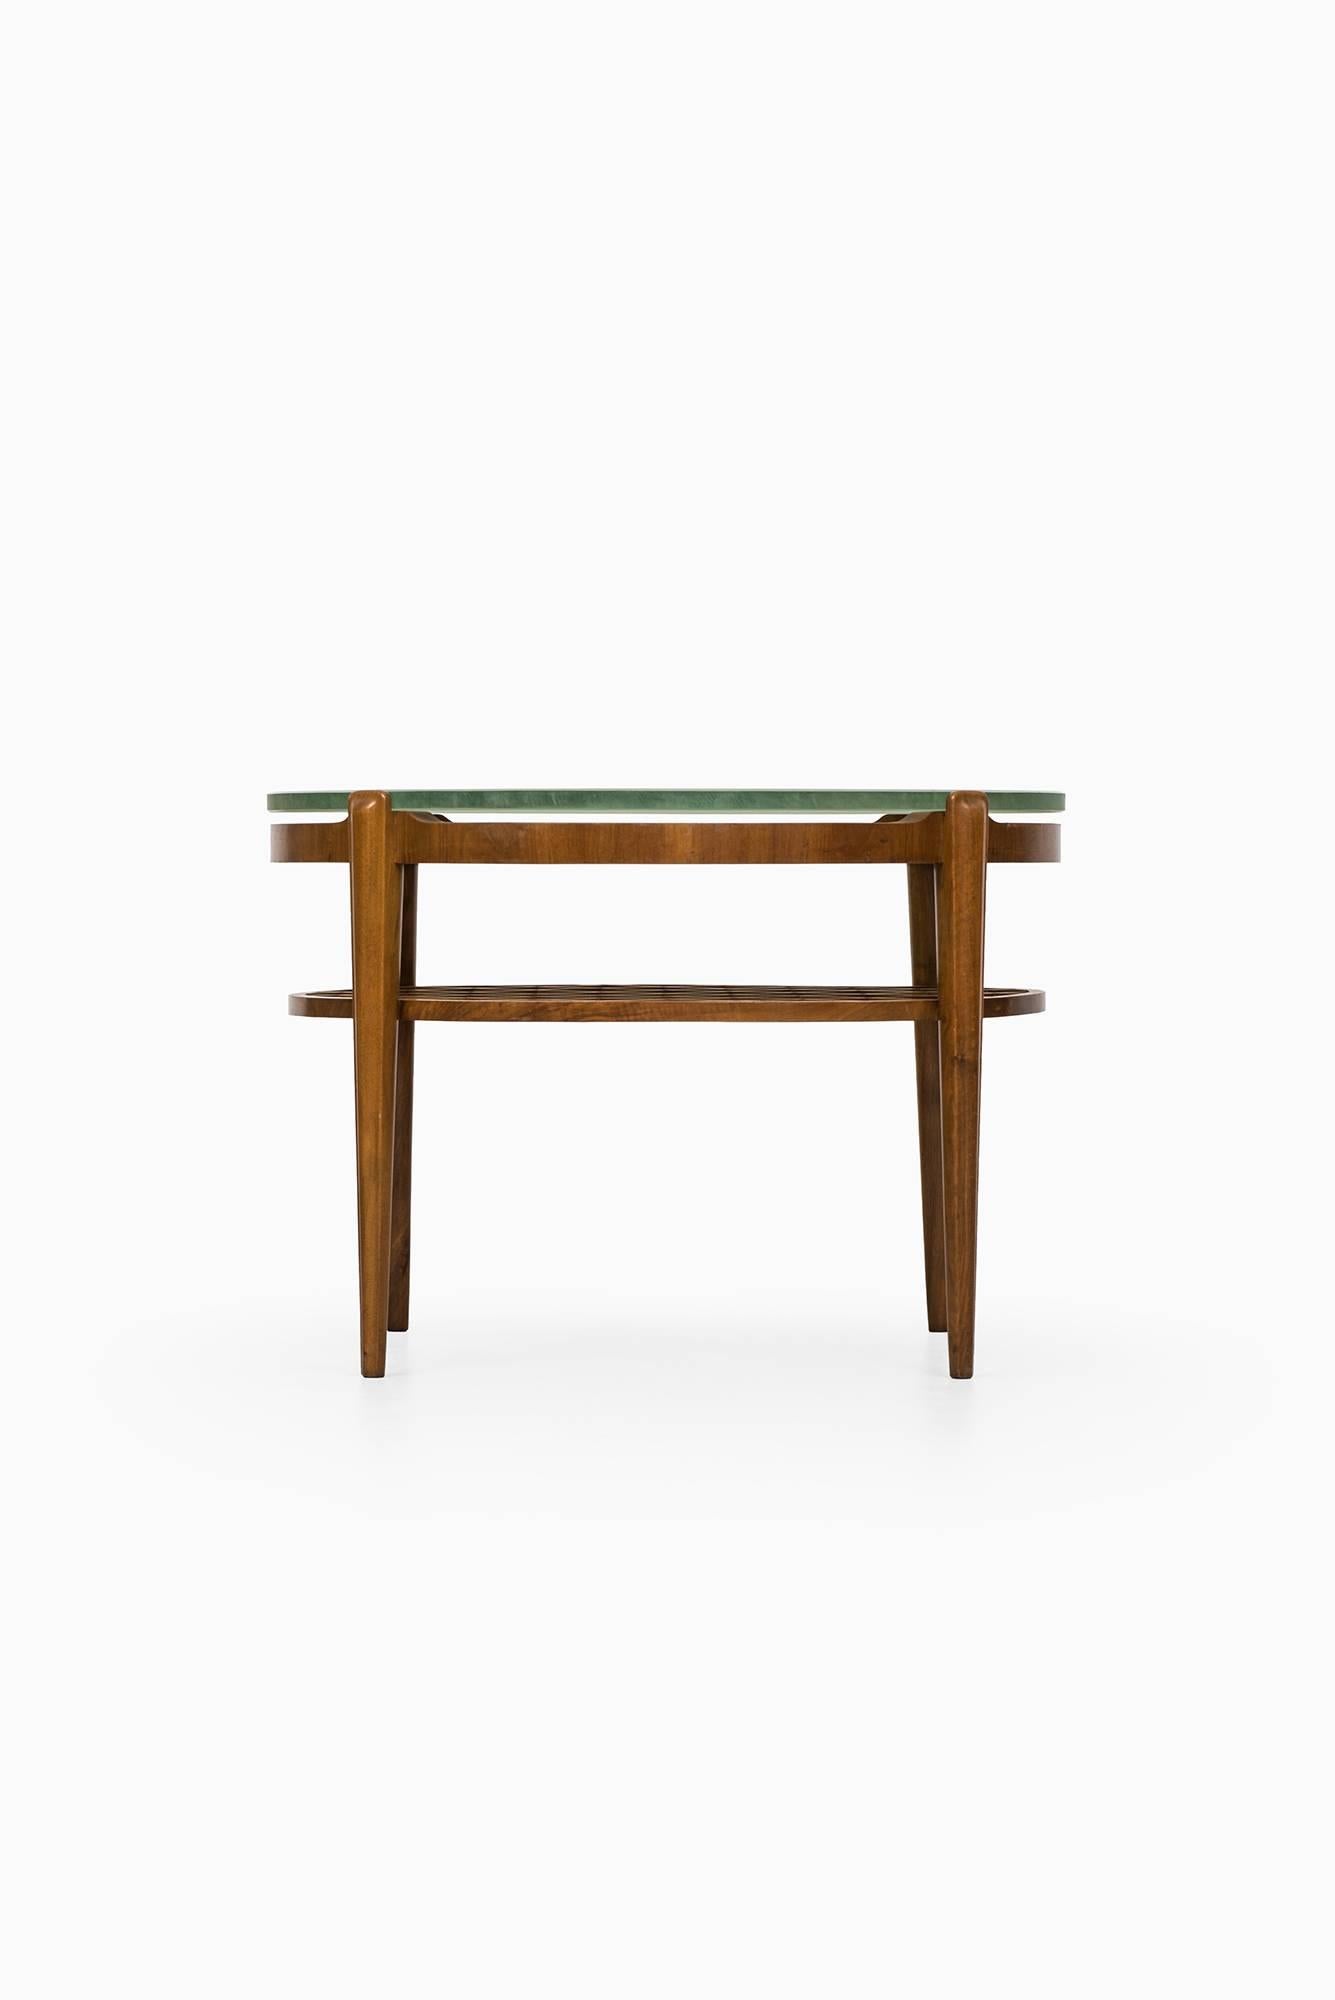 Scandinavian Modern Coffee / Side Table Attributed to Carl-Axel Acking and Produced by Bodafors